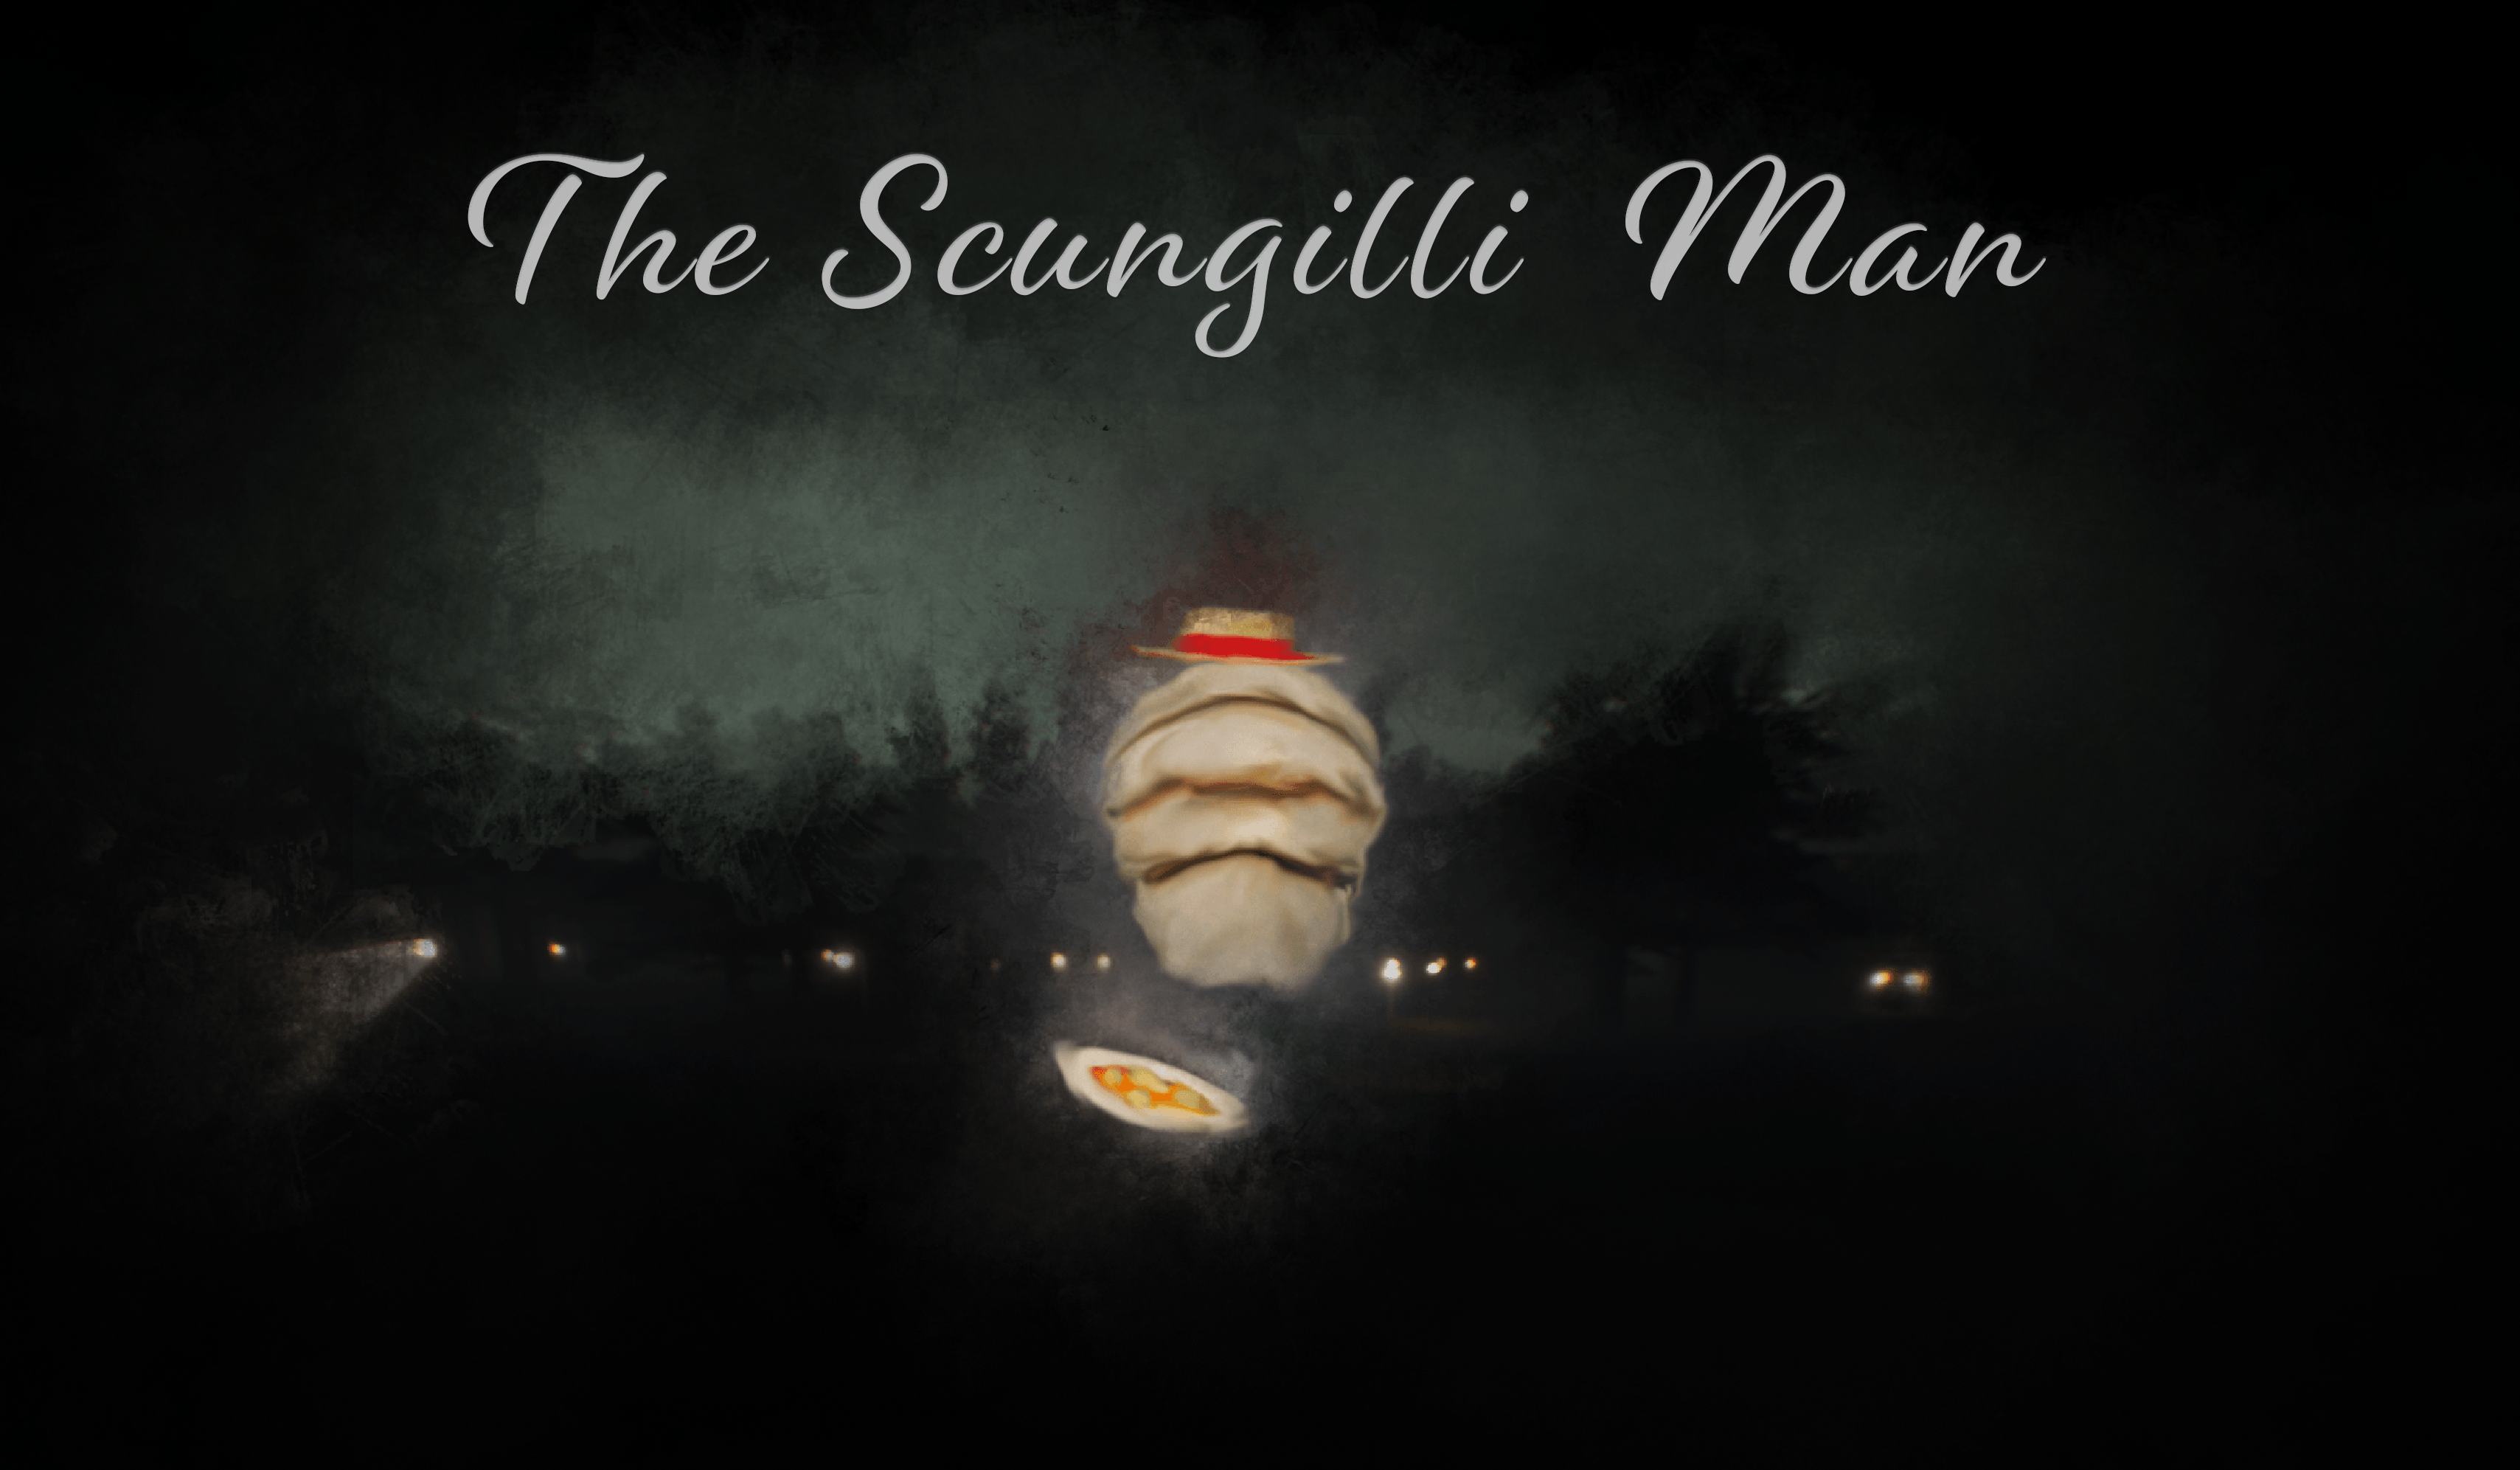 TheScungilliMan